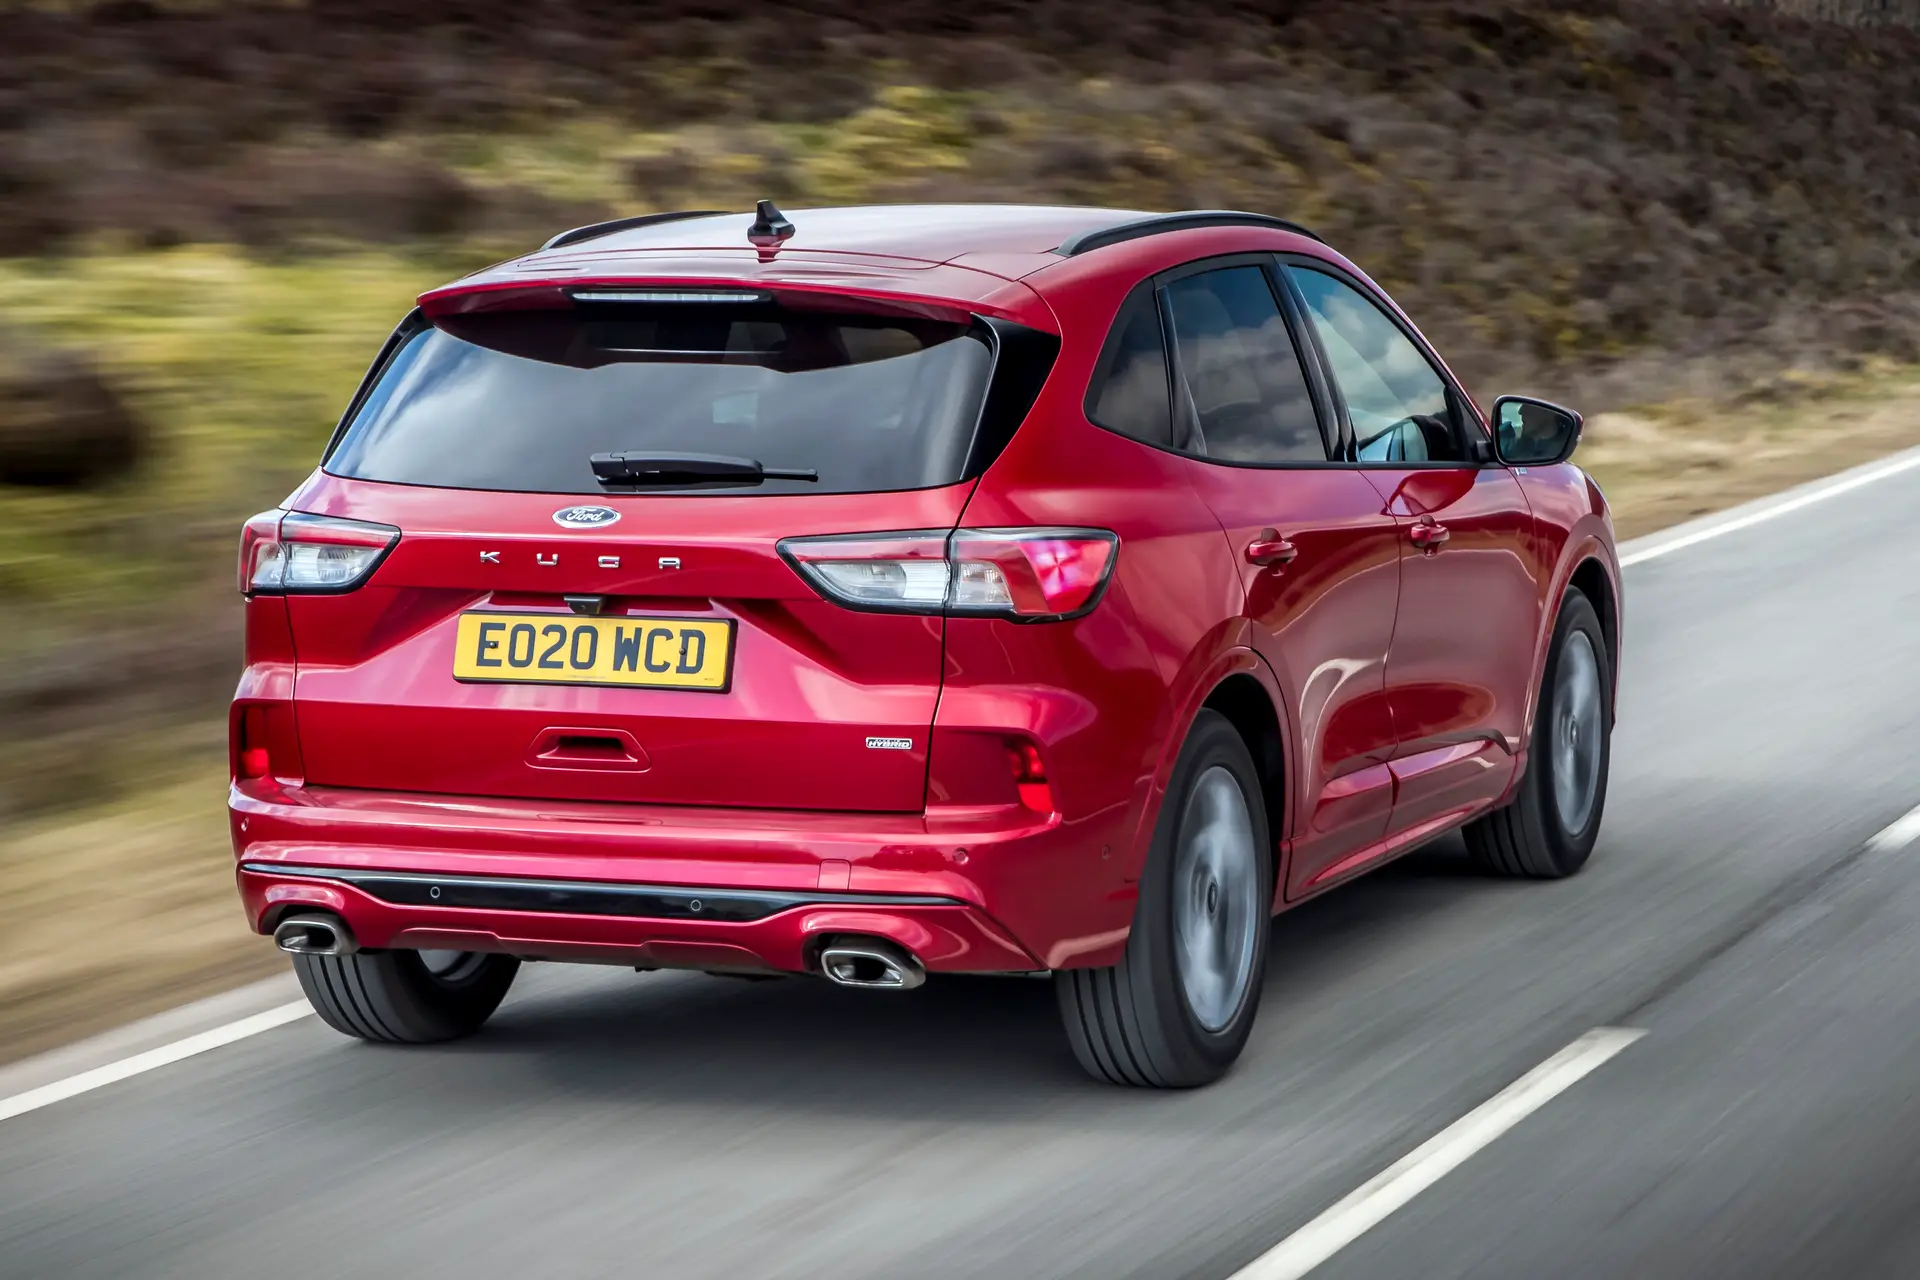 Ford Kuga 2.0 TDCi long-term test review